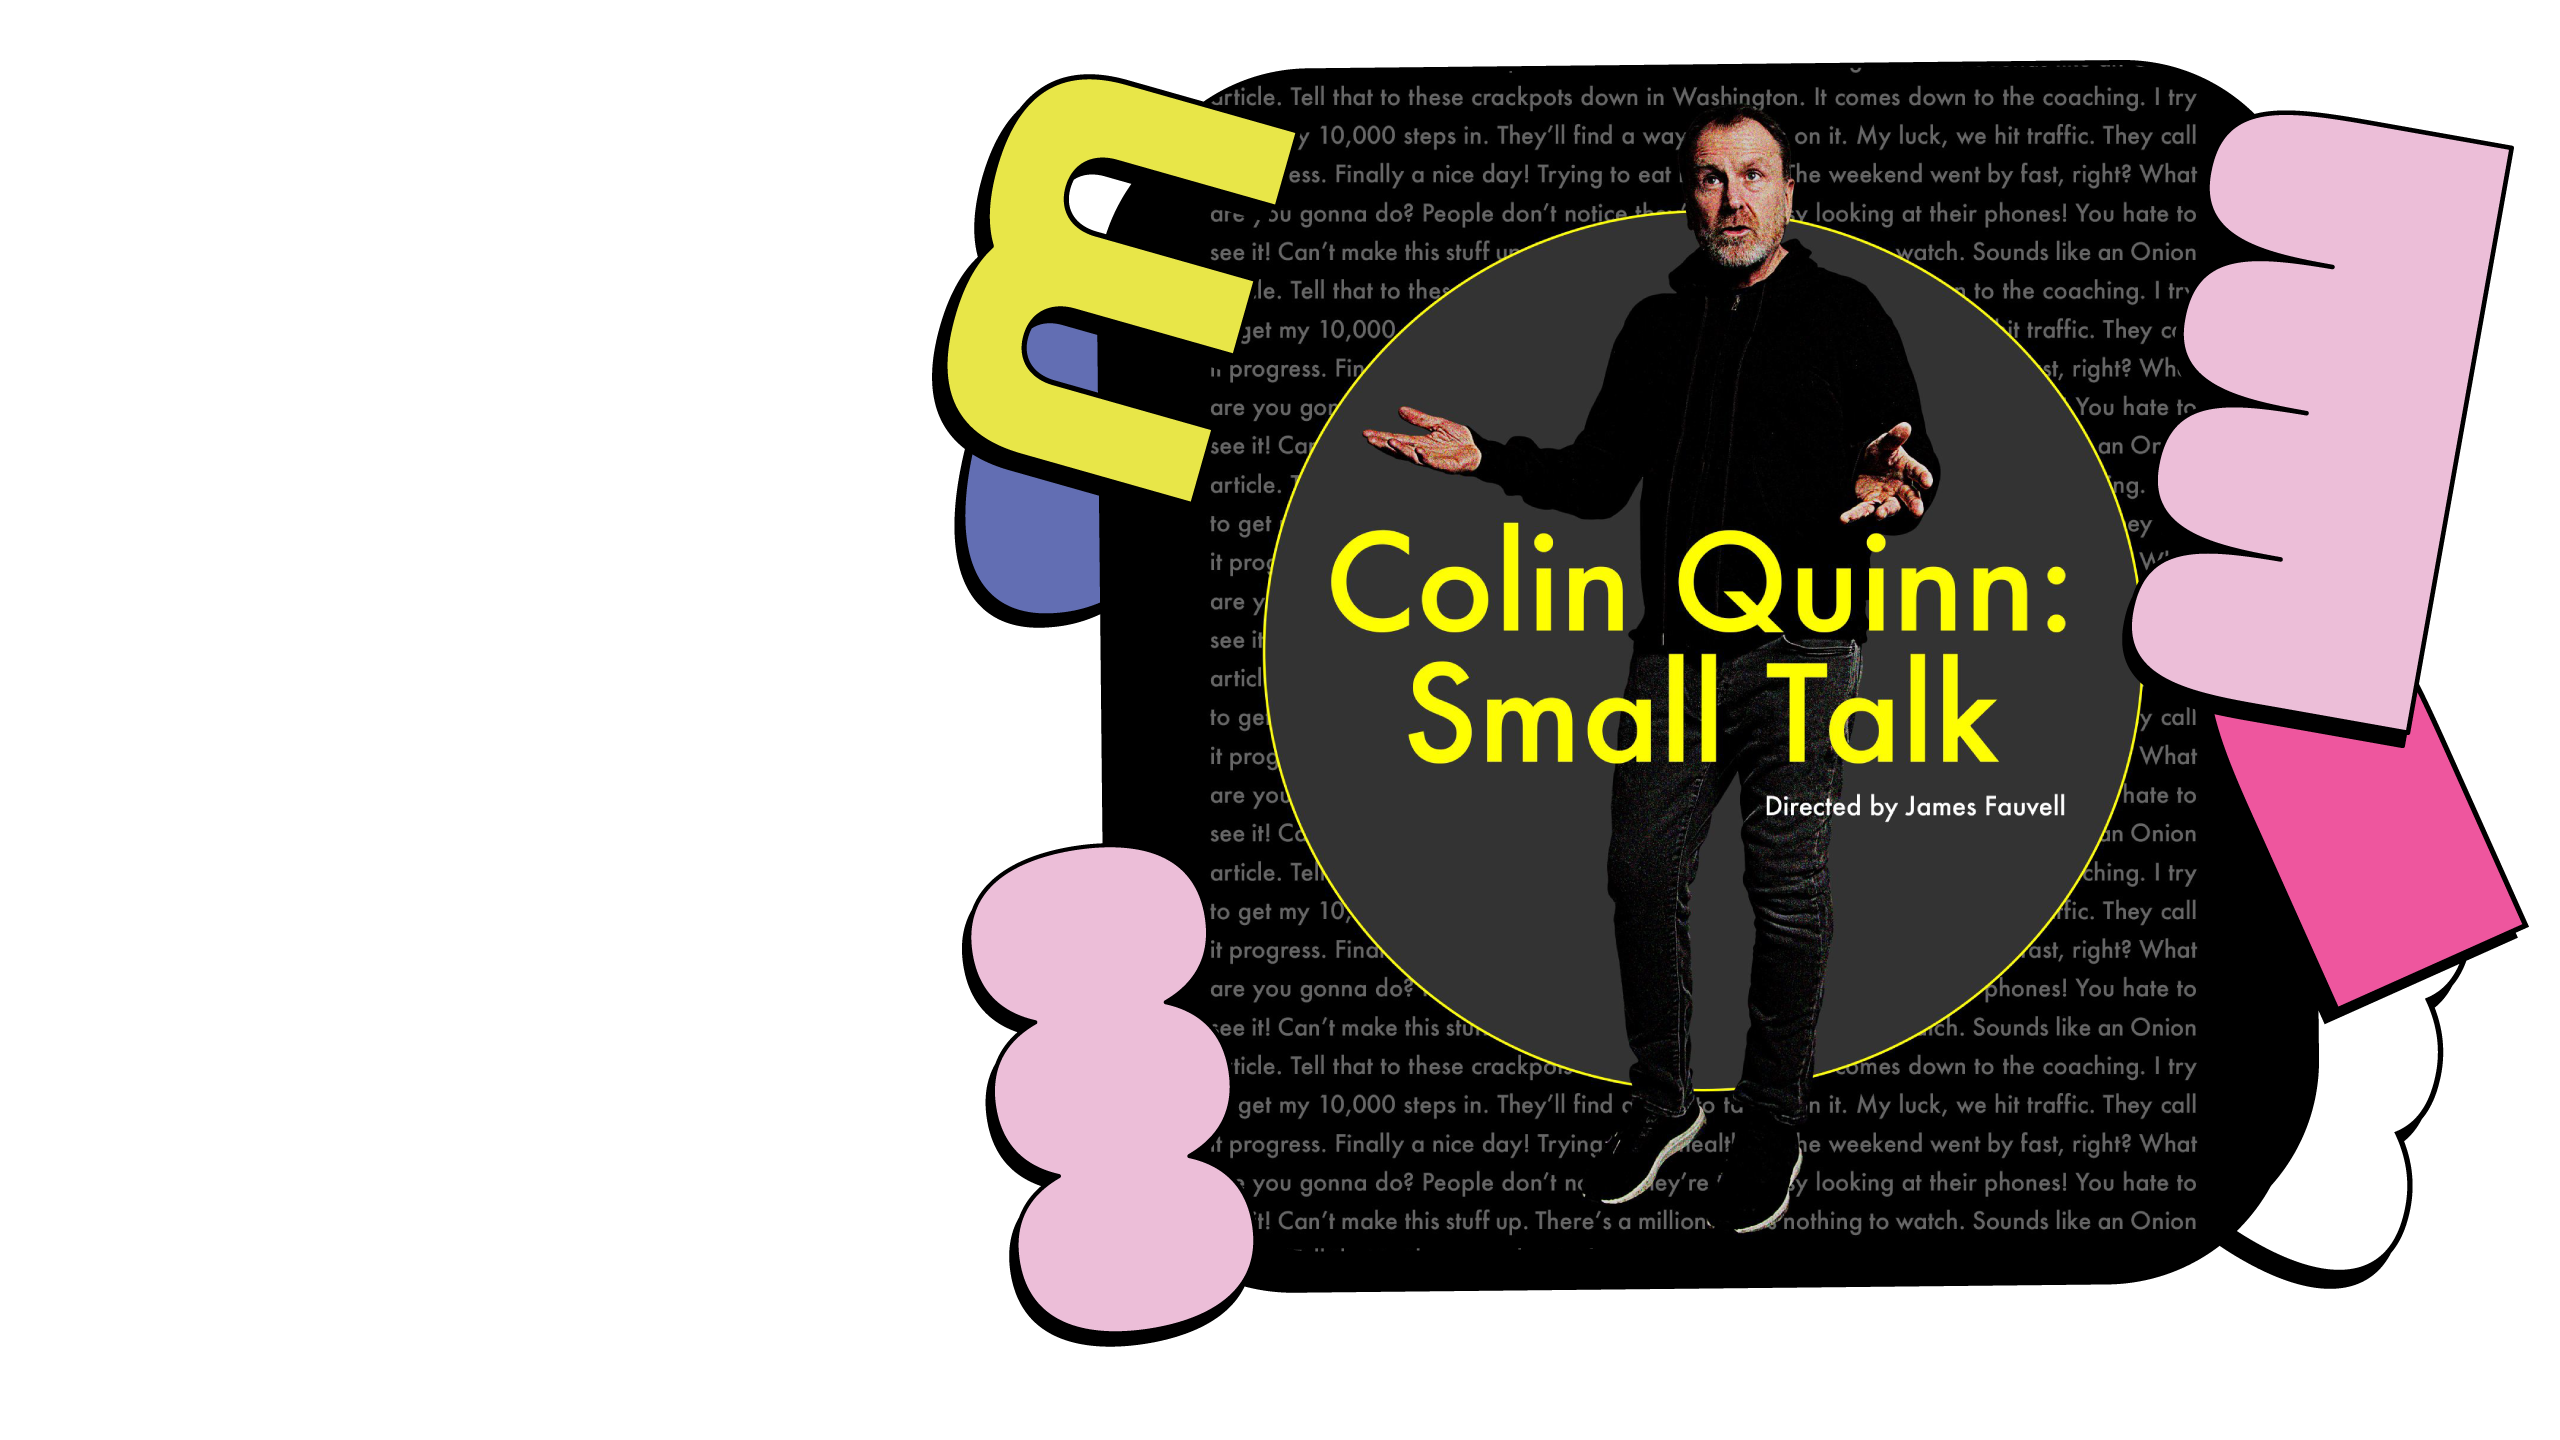 Promotional image for Colin Quinn: Small Talk